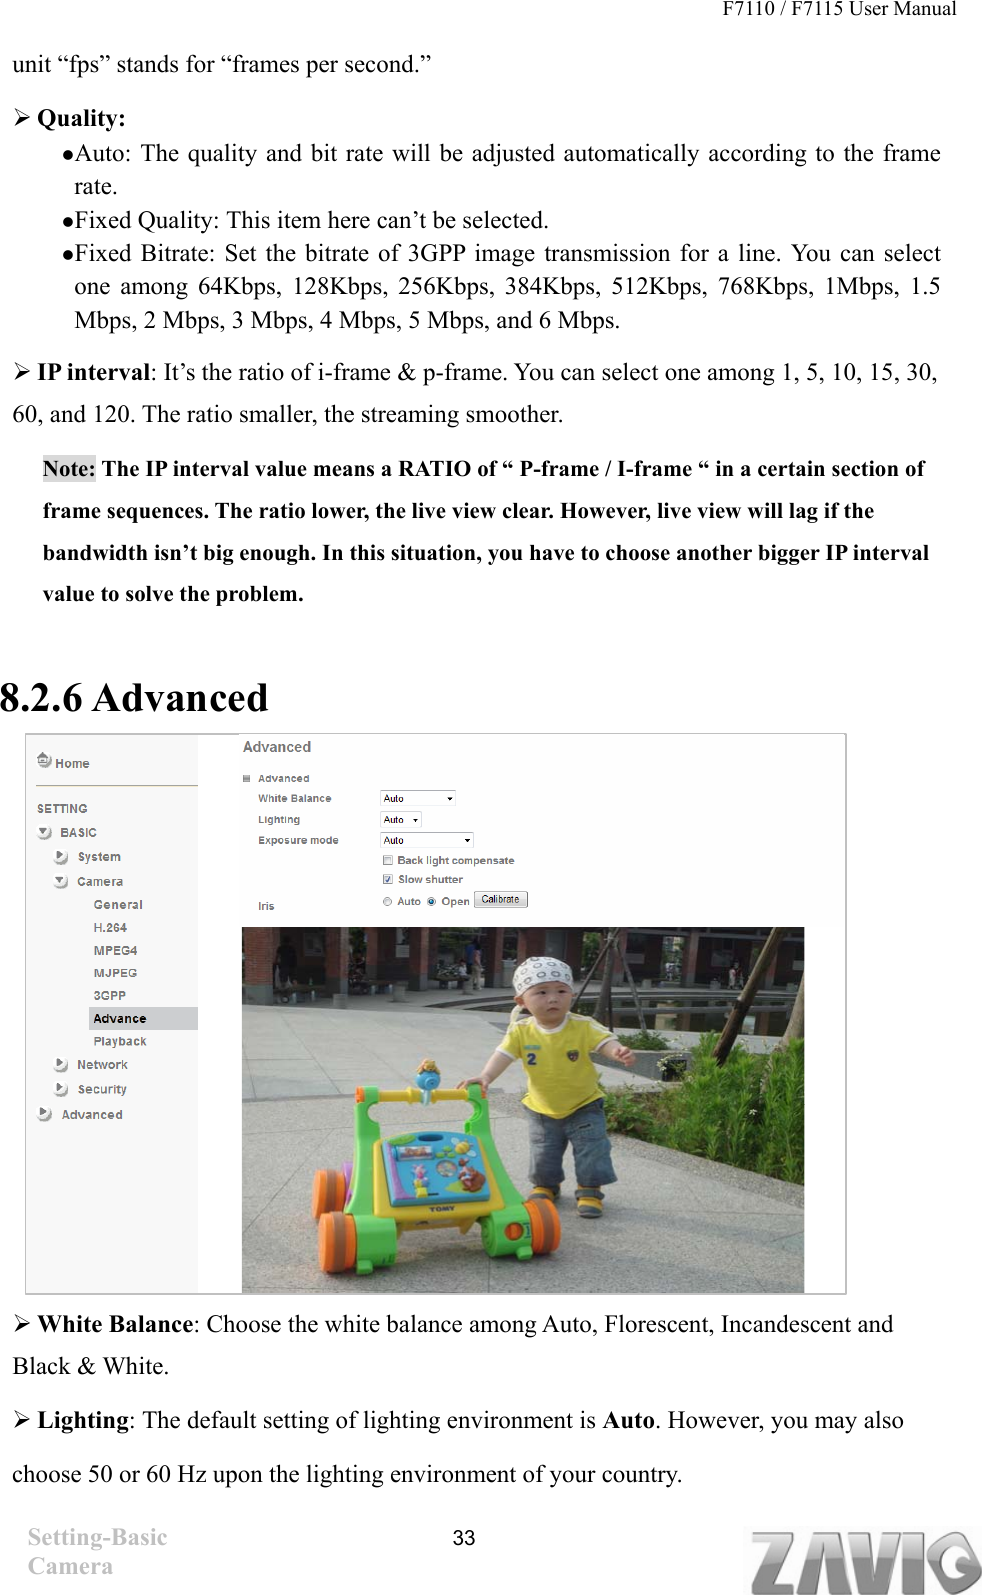 F7110 / F7115 User Manual   unit “fps” stands for “frames per second.”  Quality:   Auto: The quality and bit rate will be adjusted automatically according to the frame rate.  Fixed Quality: This item here can’t be selected.    Fixed Bitrate: Set the bitrate of 3GPP image transmission for a line. You can select one among 64Kbps, 128Kbps, 256Kbps, 384Kbps, 512Kbps, 768Kbps, 1Mbps, 1.5 Mbps, 2 Mbps, 3 Mbps, 4 Mbps, 5 Mbps, and 6 Mbps.    IP interval: It’s the ratio of i-frame &amp; p-frame. You can select one among 1, 5, 10, 15, 30, 60, and 120. The ratio smaller, the streaming smoother. Note: The IP interval value means a RATIO of “ P-frame / I-frame “ in a certain section of frame sequences. The ratio lower, the live view clear. However, live view will lag if the bandwidth isn’t big enough. In this situation, you have to choose another bigger IP interval value to solve the problem.  8.2.6 Advanced                     White Balance: Choose the white balance among Auto, Florescent, Incandescent and Black &amp; White.    Lighting: The default setting of lighting environment is Auto. However, you may also choose 50 or 60 Hz upon the lighting environment of your country. Setting-Basic Camera  33